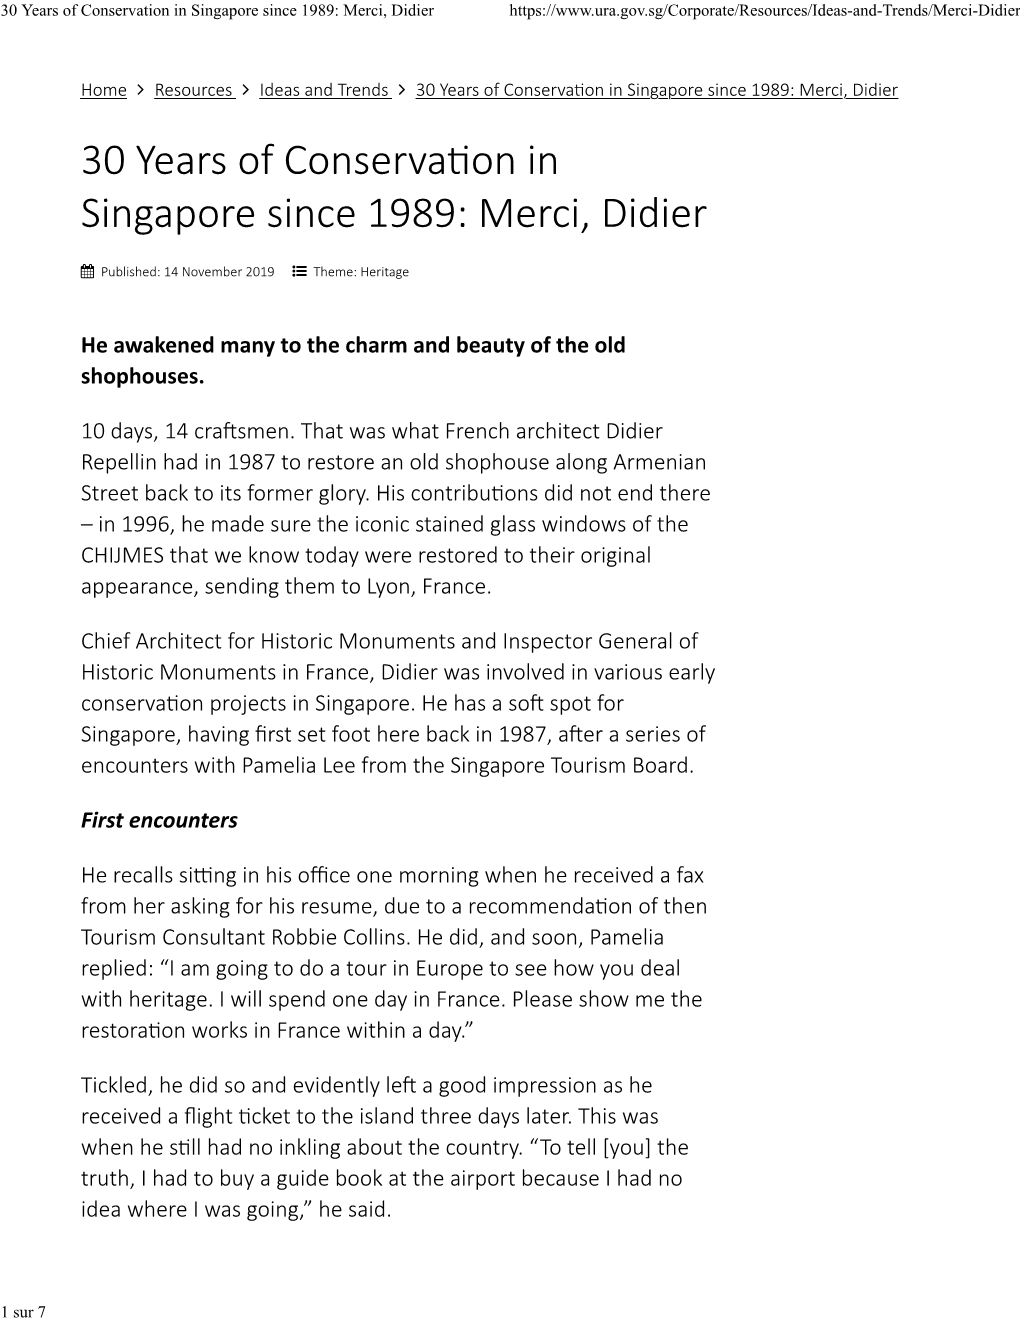 30 Years of Conservation in Singapore Since 1989: Merci, Didier